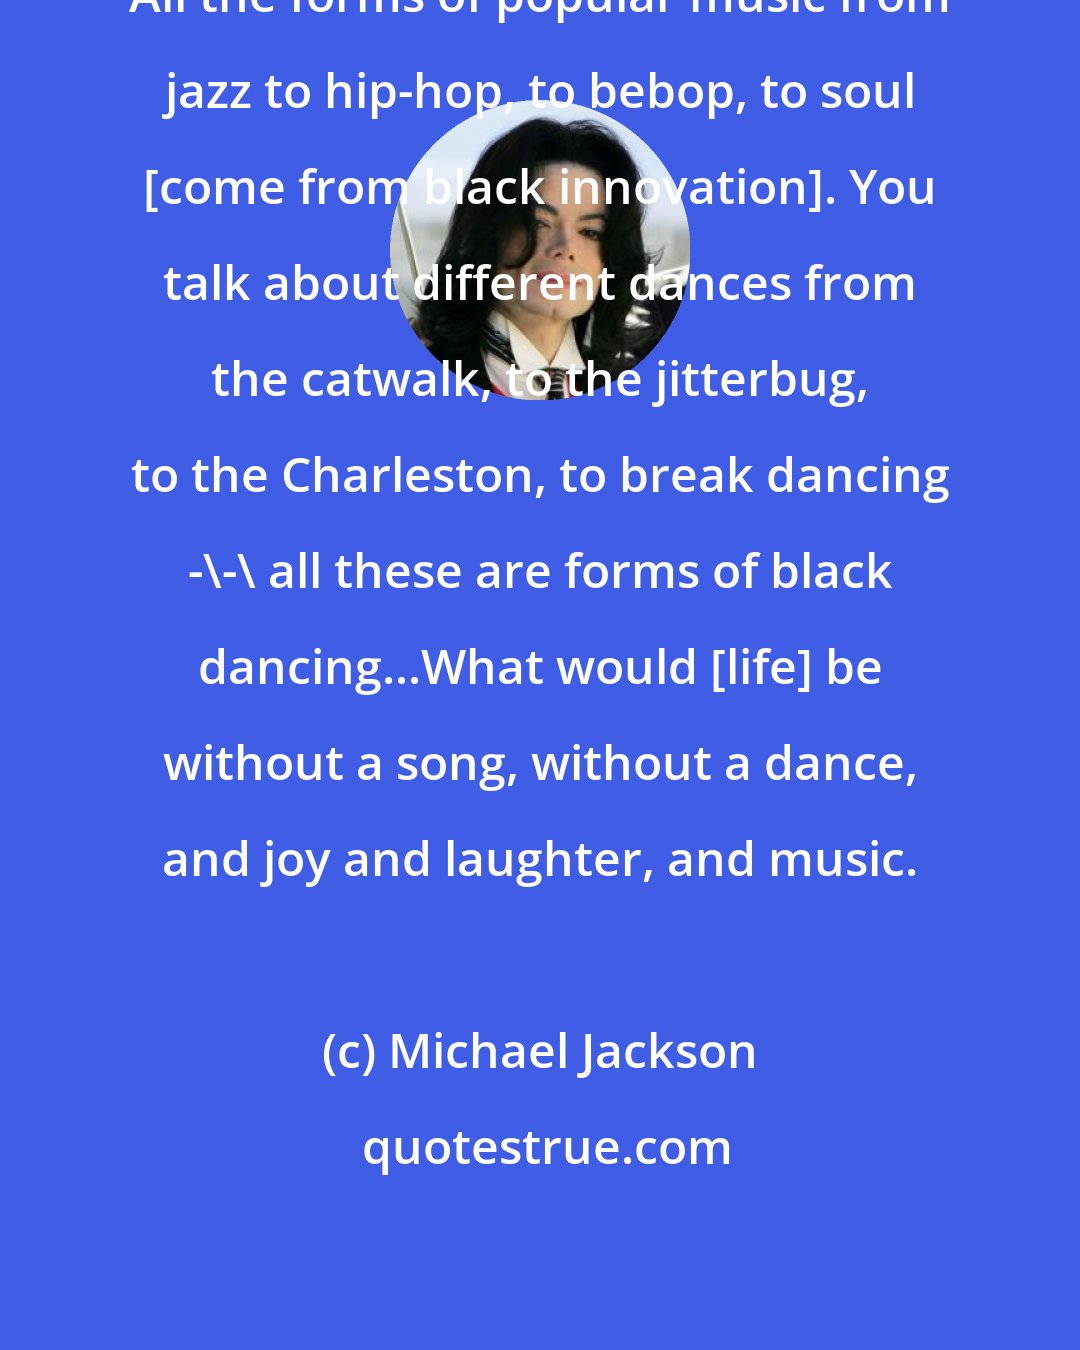 Michael Jackson: All the forms of popular music from jazz to hip-hop, to bebop, to soul [come from black innovation]. You talk about different dances from the catwalk, to the jitterbug, to the Charleston, to break dancing -\-\ all these are forms of black dancing...What would [life] be without a song, without a dance, and joy and laughter, and music.